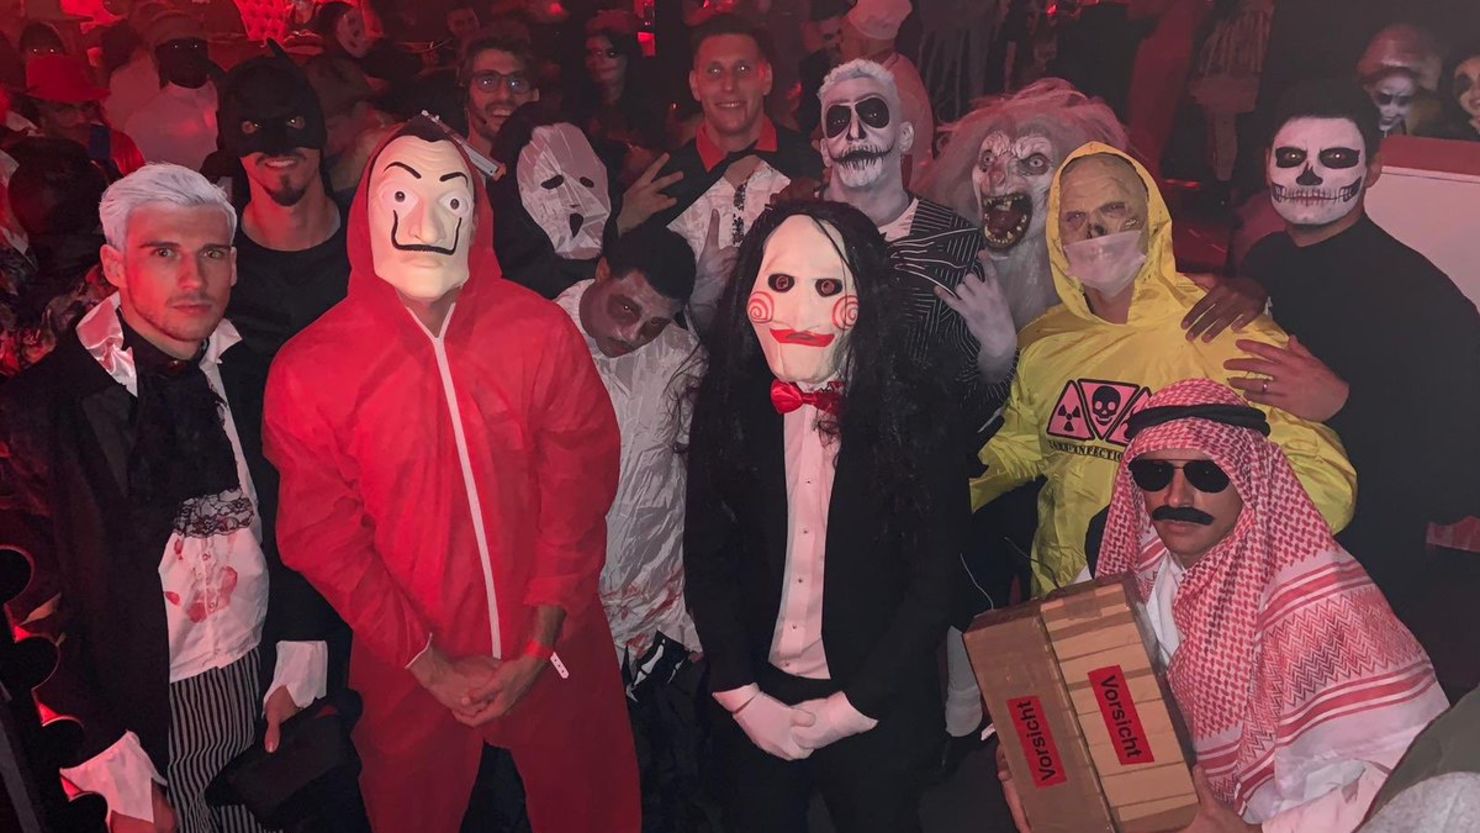 The photo of Bayern Munich's Halloween fancy dress party posted on the club's Twitter account.